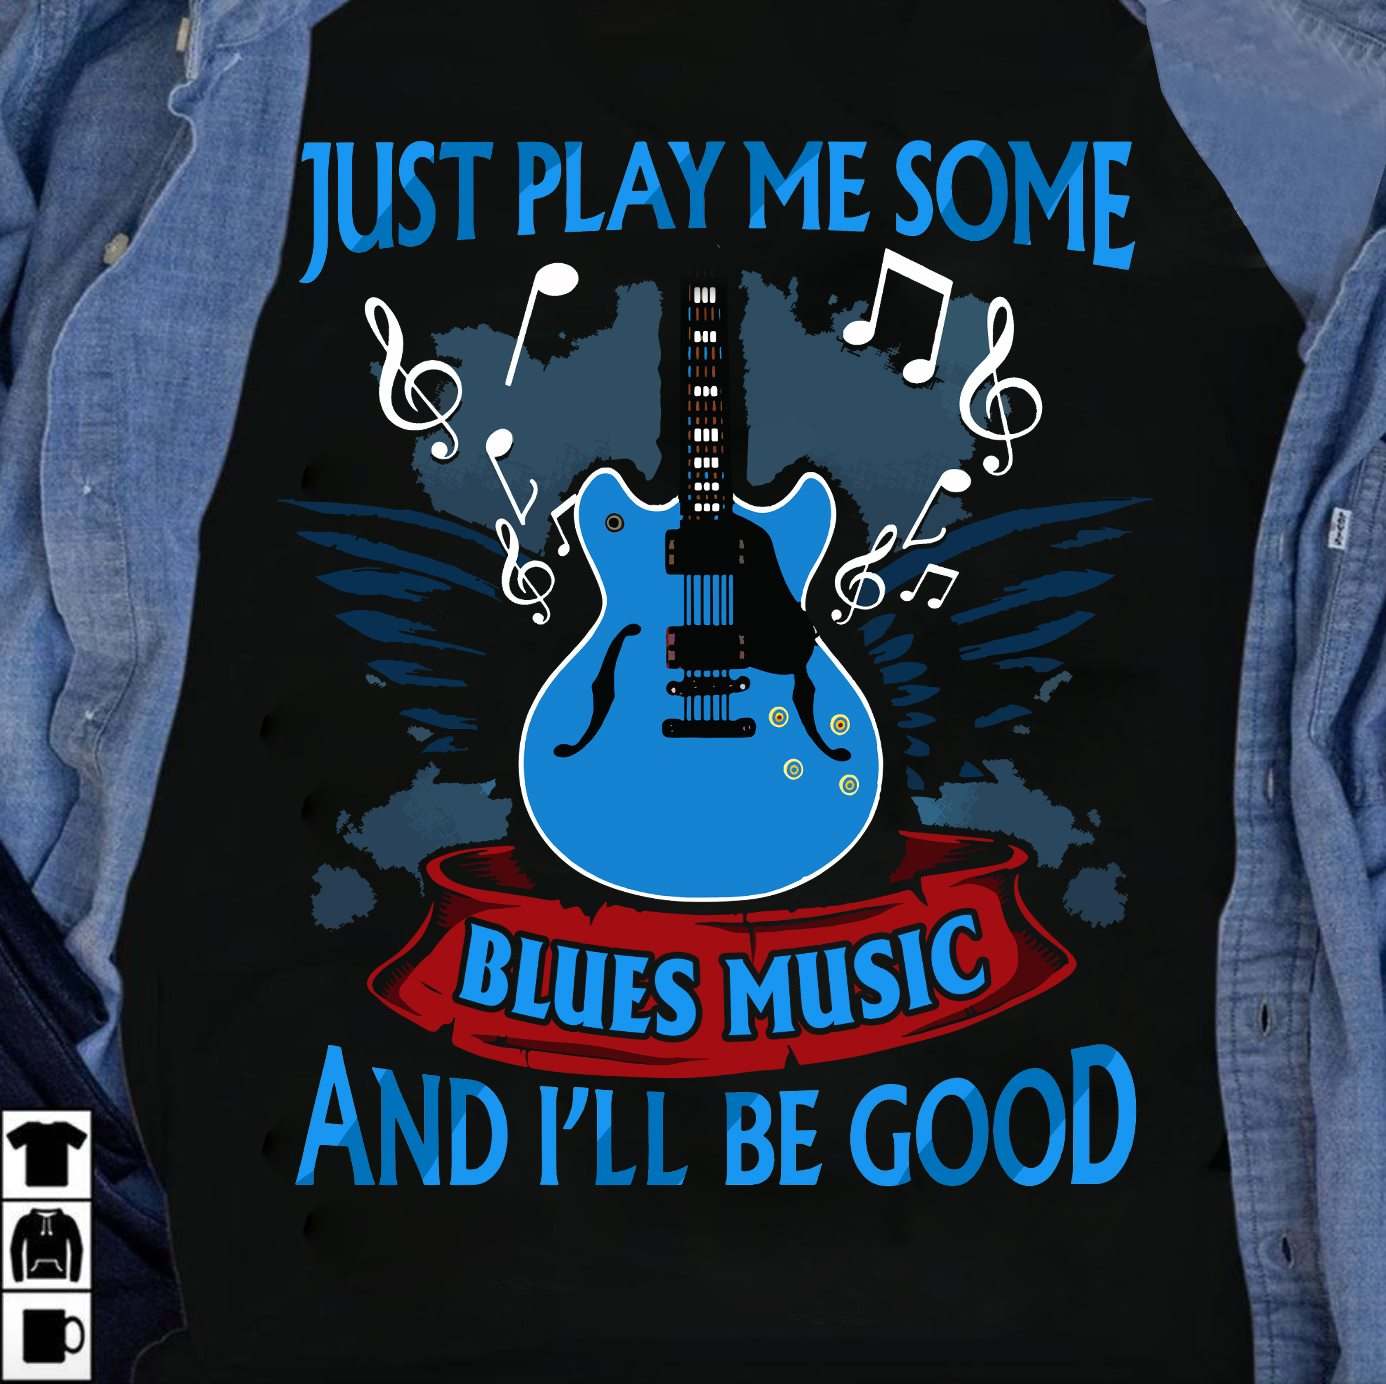 Just play me some blues music and I'll be good - Guitar lover, blues music